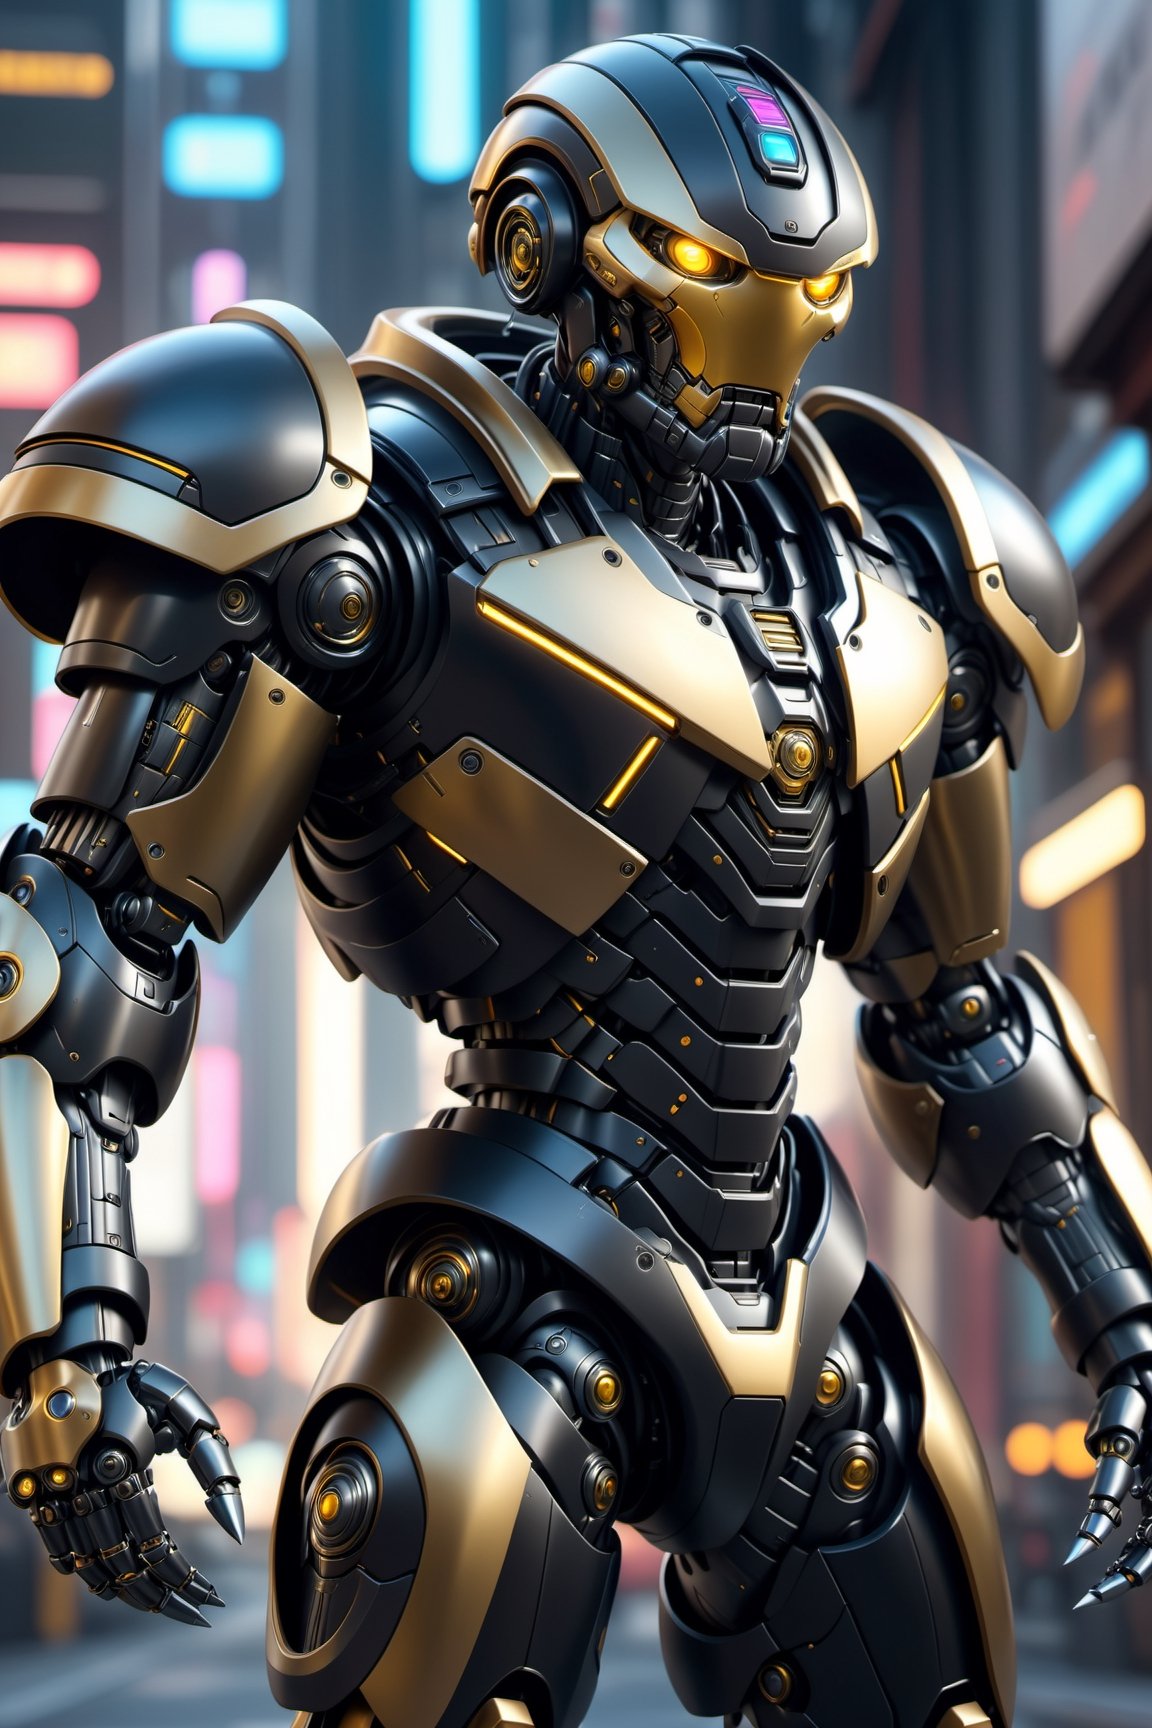 Angry AgileDung cyberpunk mecha robo soldier character,black armor, anthropomorphic figure, wearing futuristic soldier armor and weapons, reflection mapping, realistic figure, hyperdetailed, cinematic lighting photography, 32k uhd with a golden staff, roaring

By: panchovilla,mecha